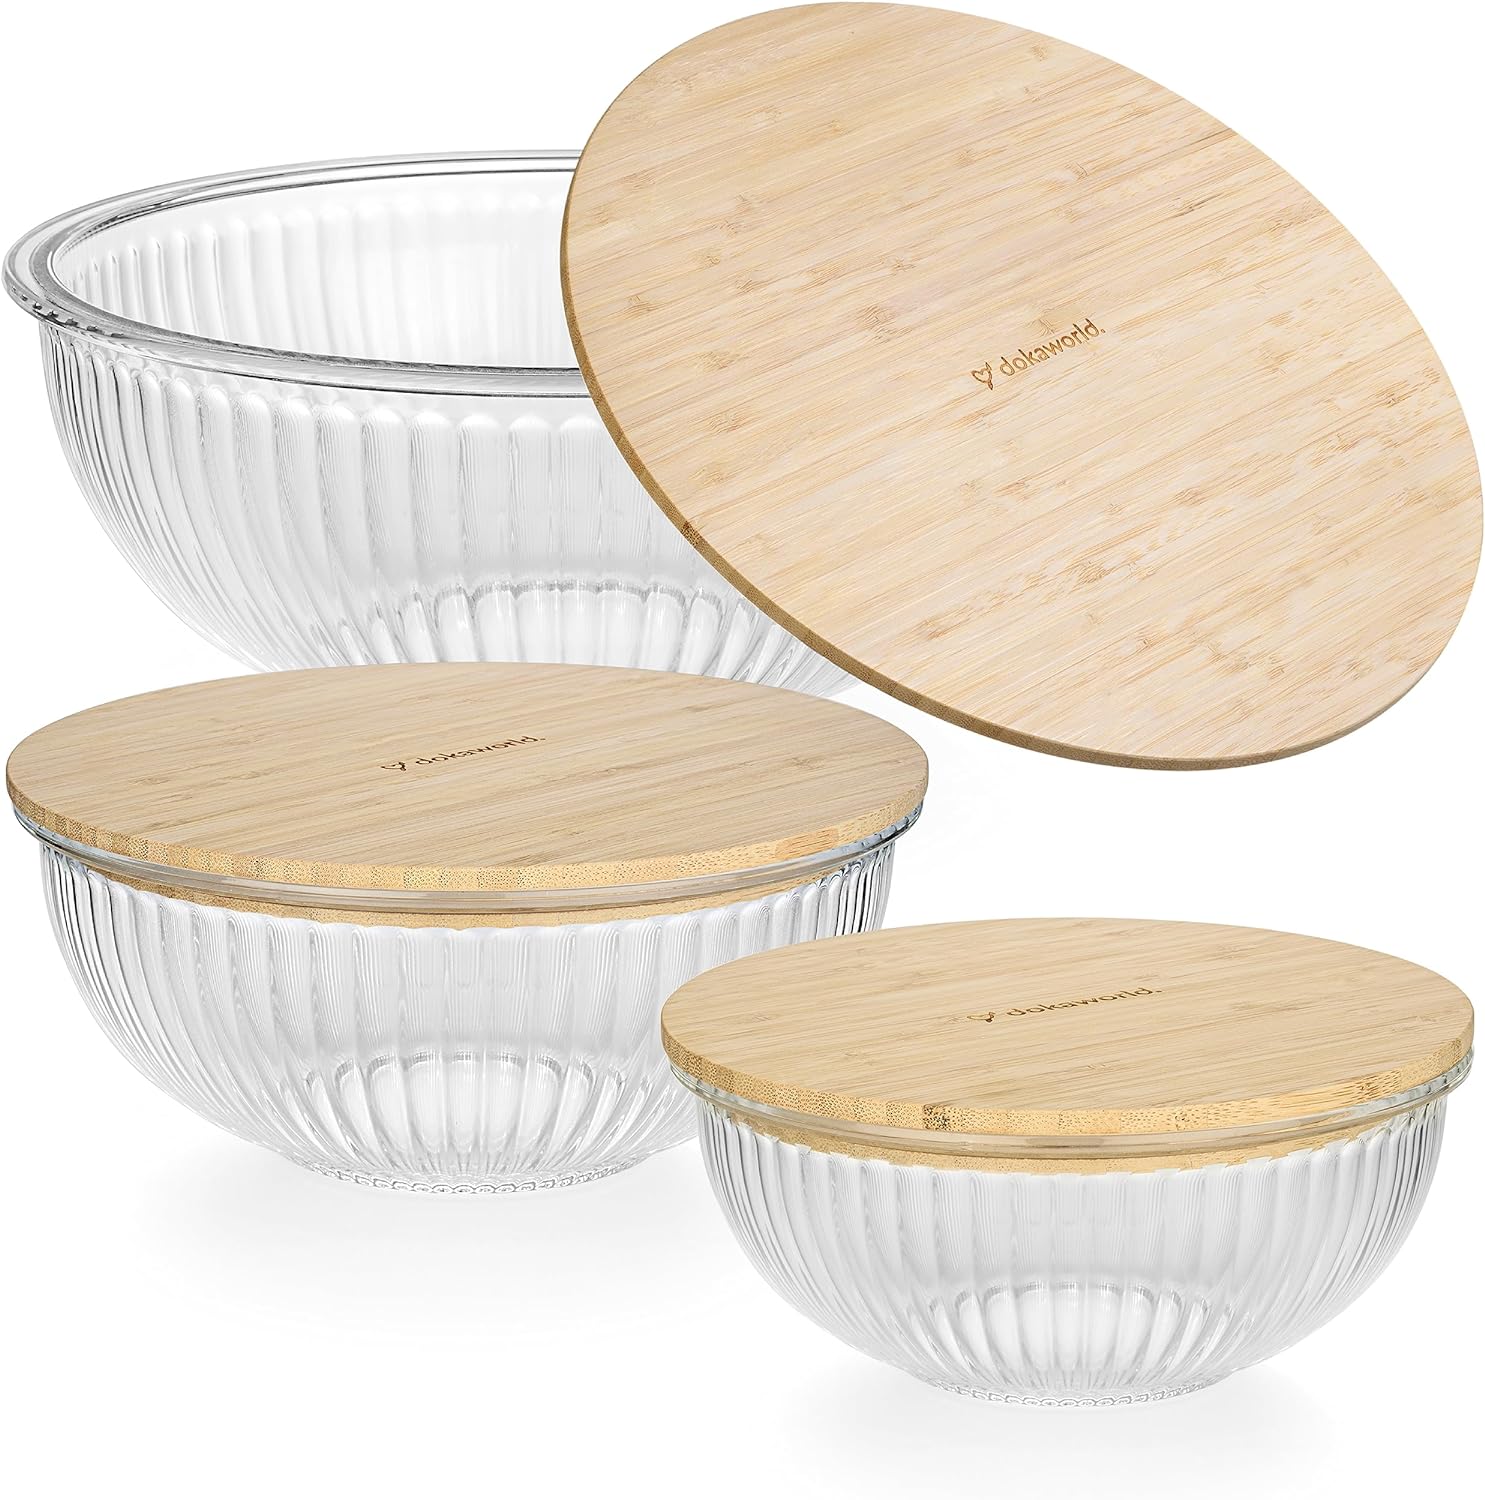 https://bigbigmart.com/wp-content/uploads/2023/09/Dokaworld-Glass-Mixing-Bowls-Nesting-Bowls-Cute-Collapsible-Glass-Bowls-With-Lids-Food-Storage-3-Stackable-Microwave-Safe-Glass-Containers-Salad-Bamboo-Mixing-Bowls-Baking-Glass-Bowls-Set-For-Kitchen-2.jpg